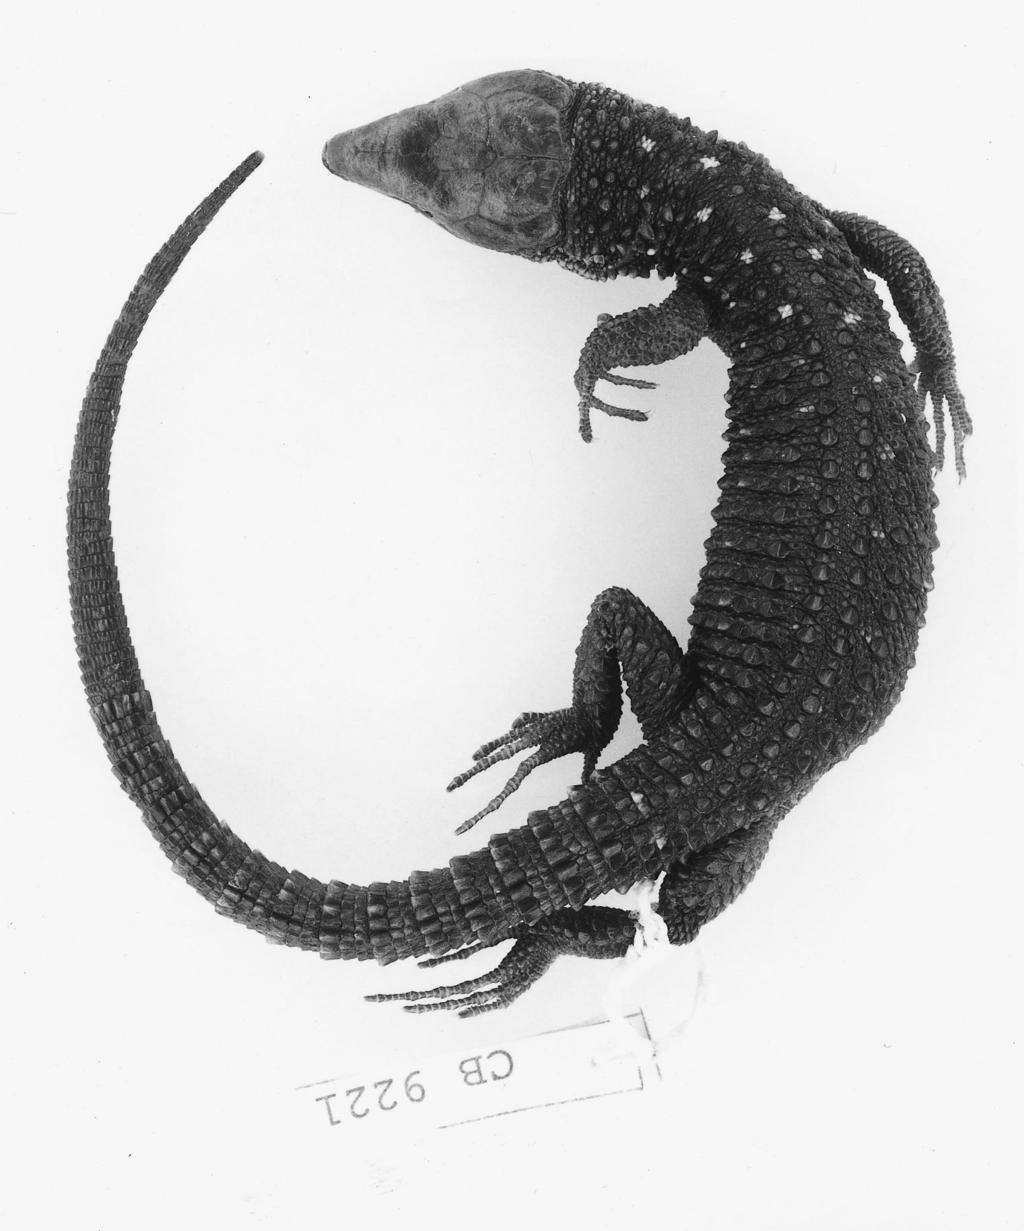 32 Contributions in Science, Number 493 Bezy and Camarillo: Systematics of Lepidophyma Figure 29 The holotype of Lepidophyma tarascae (IPN 922; snout vent length, 93 mm). SIZE.